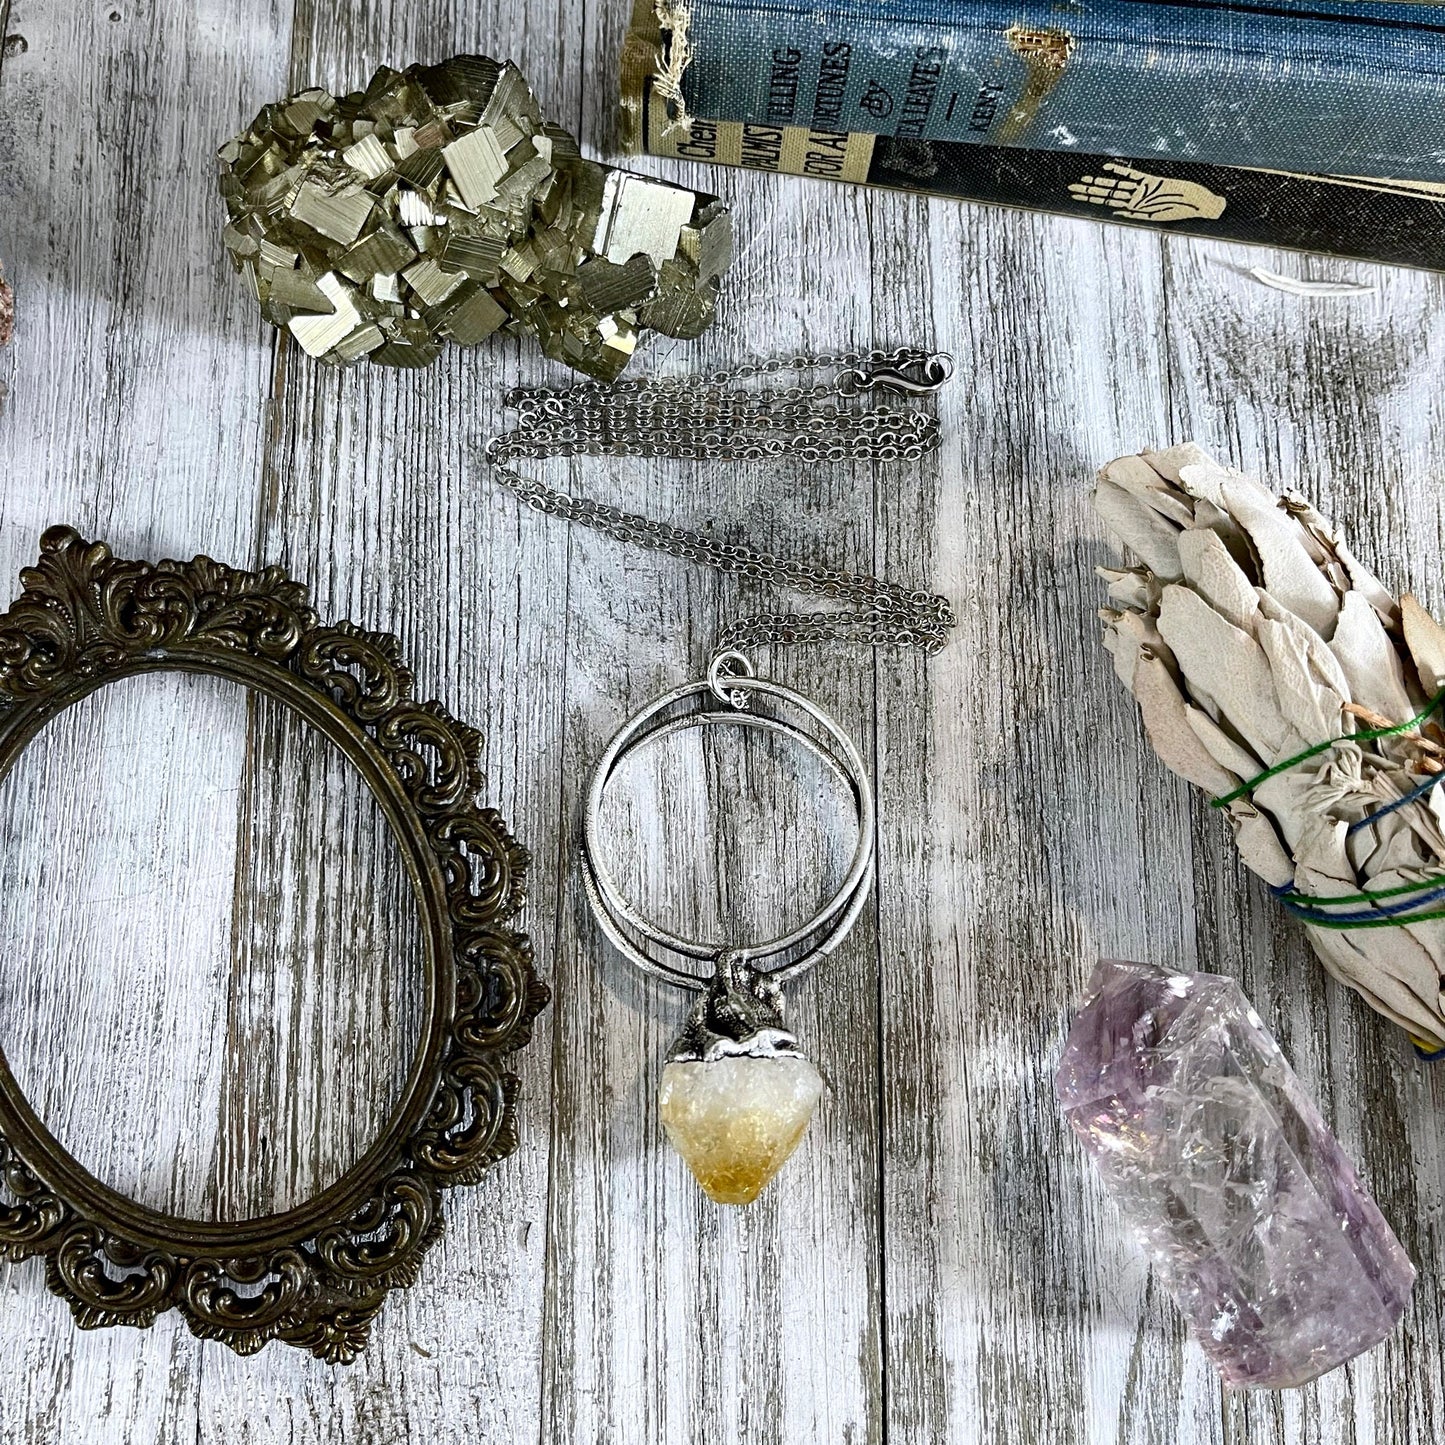 Large Citrine Necklace / Big Crystal Necklace Silver / Foxlark Collection - One of a Kind